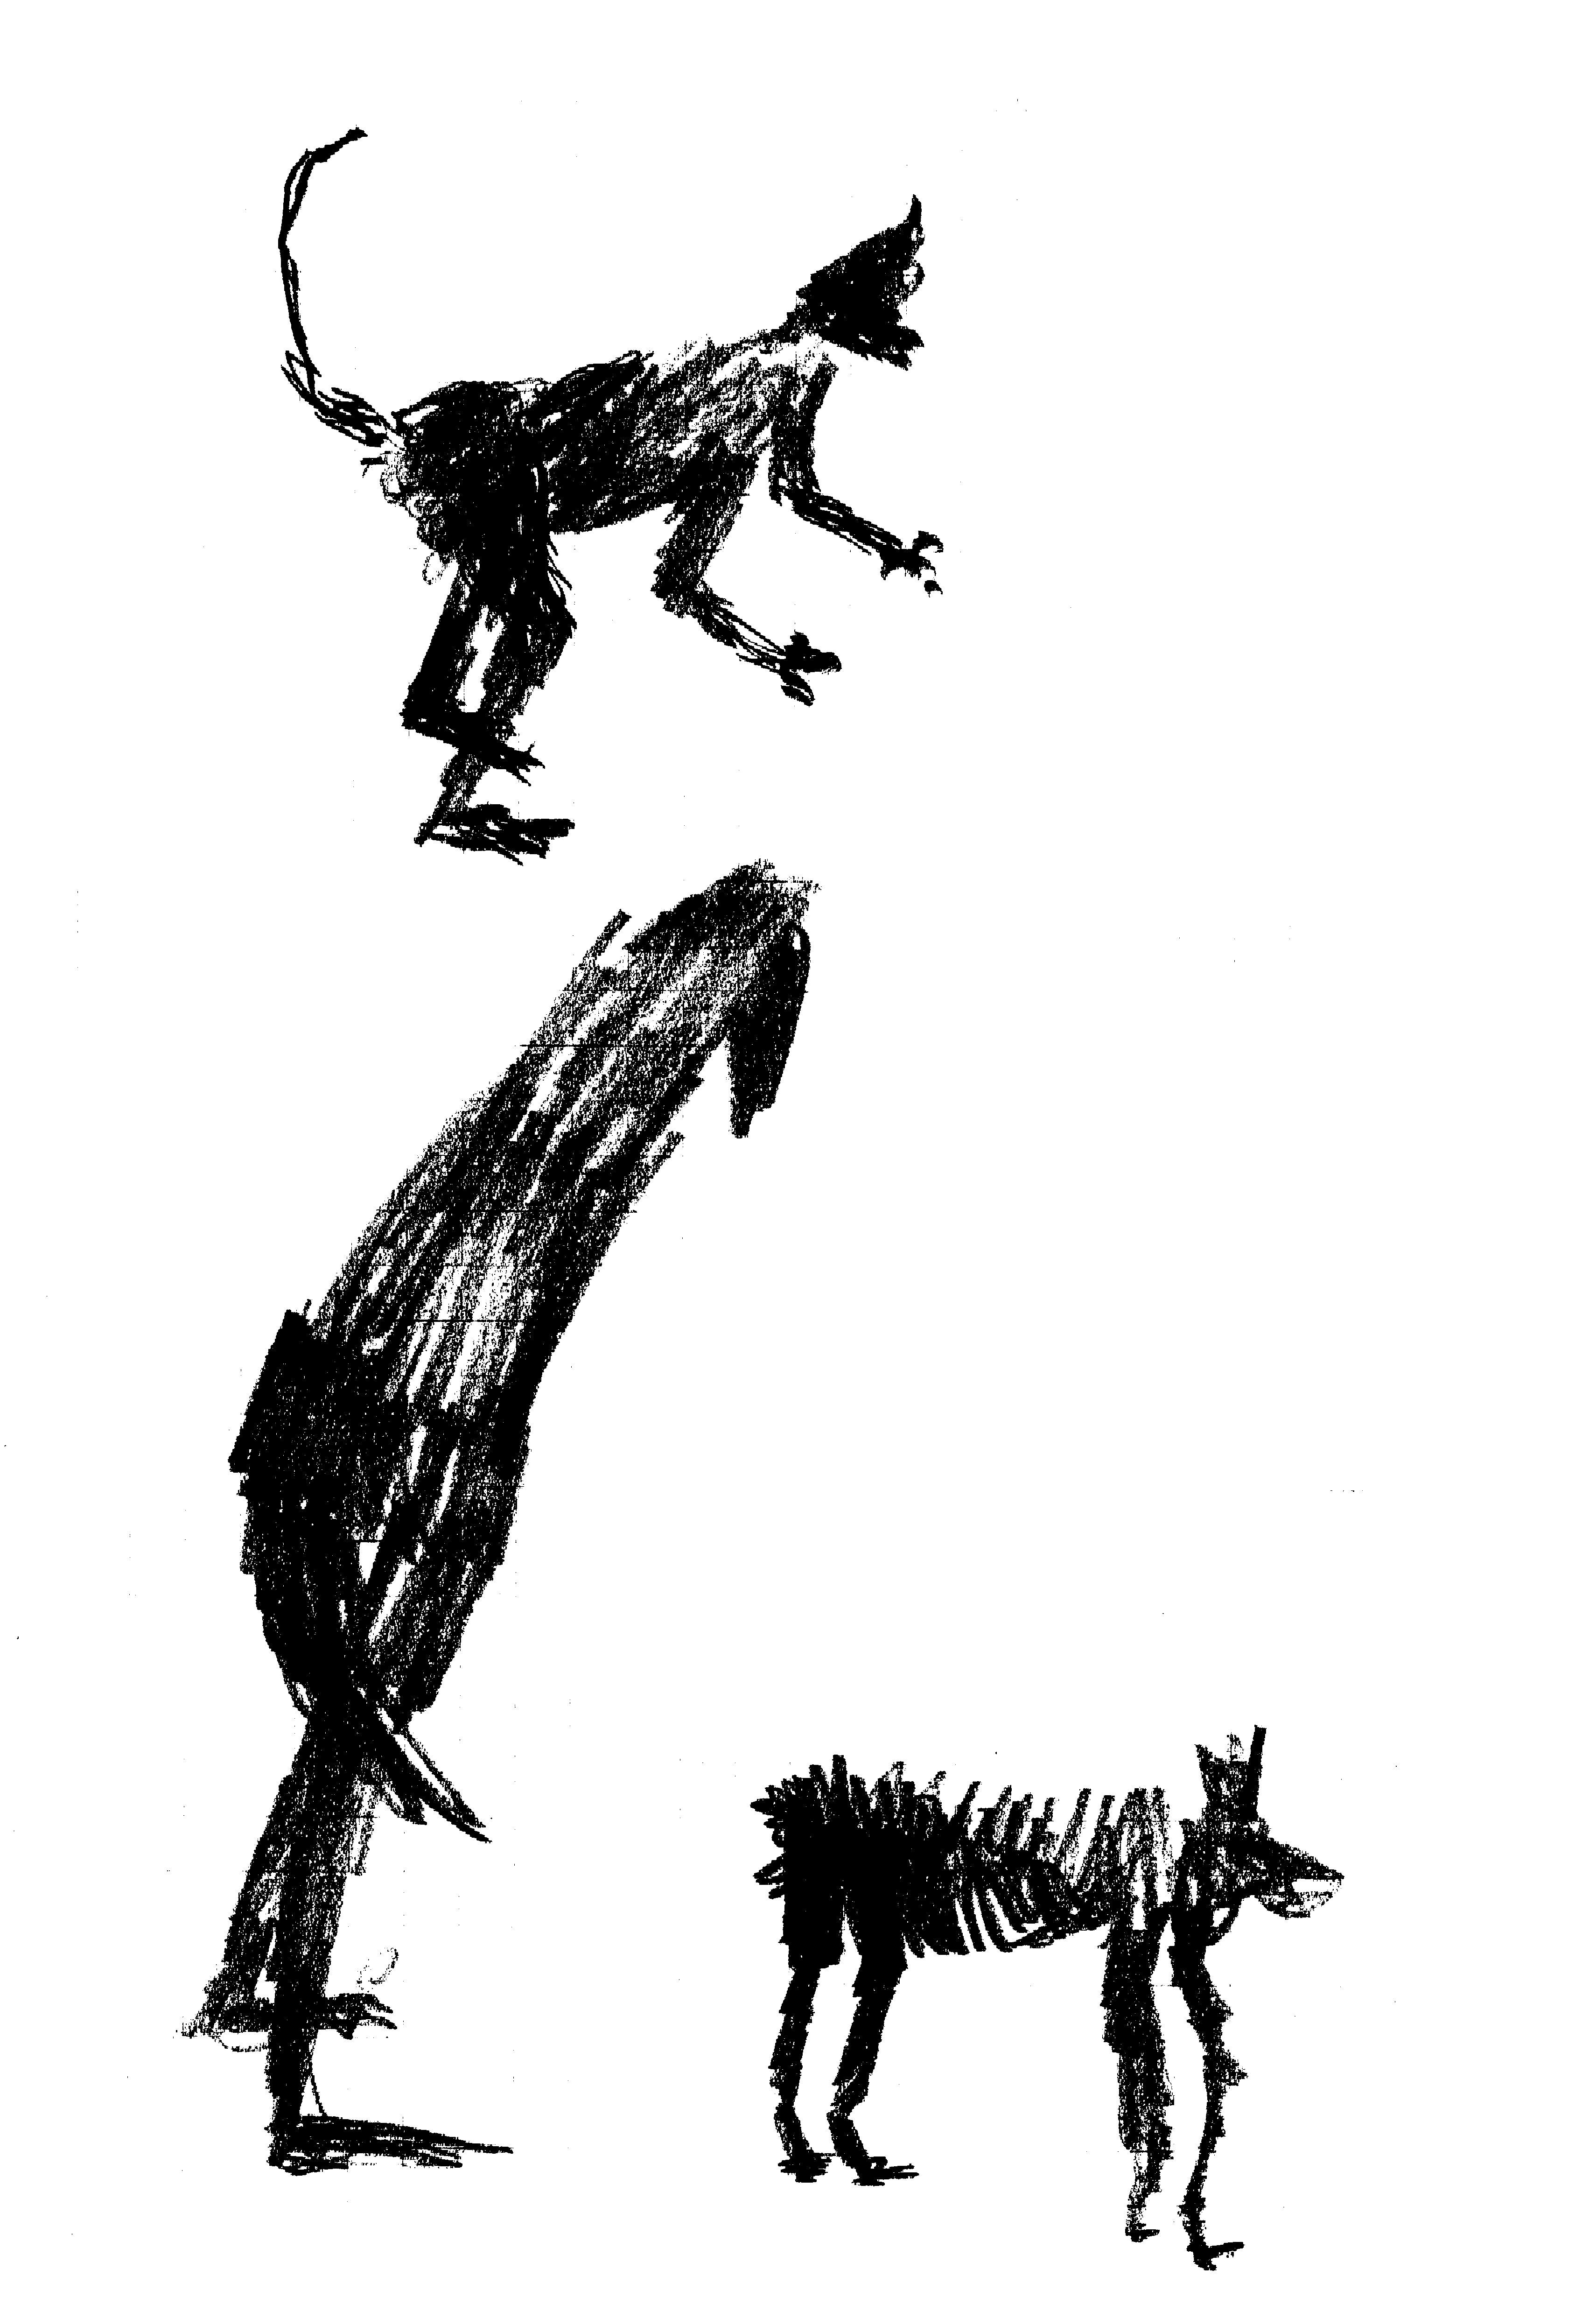 a monkey, a tall bird, and a dog all facing right drawn in black